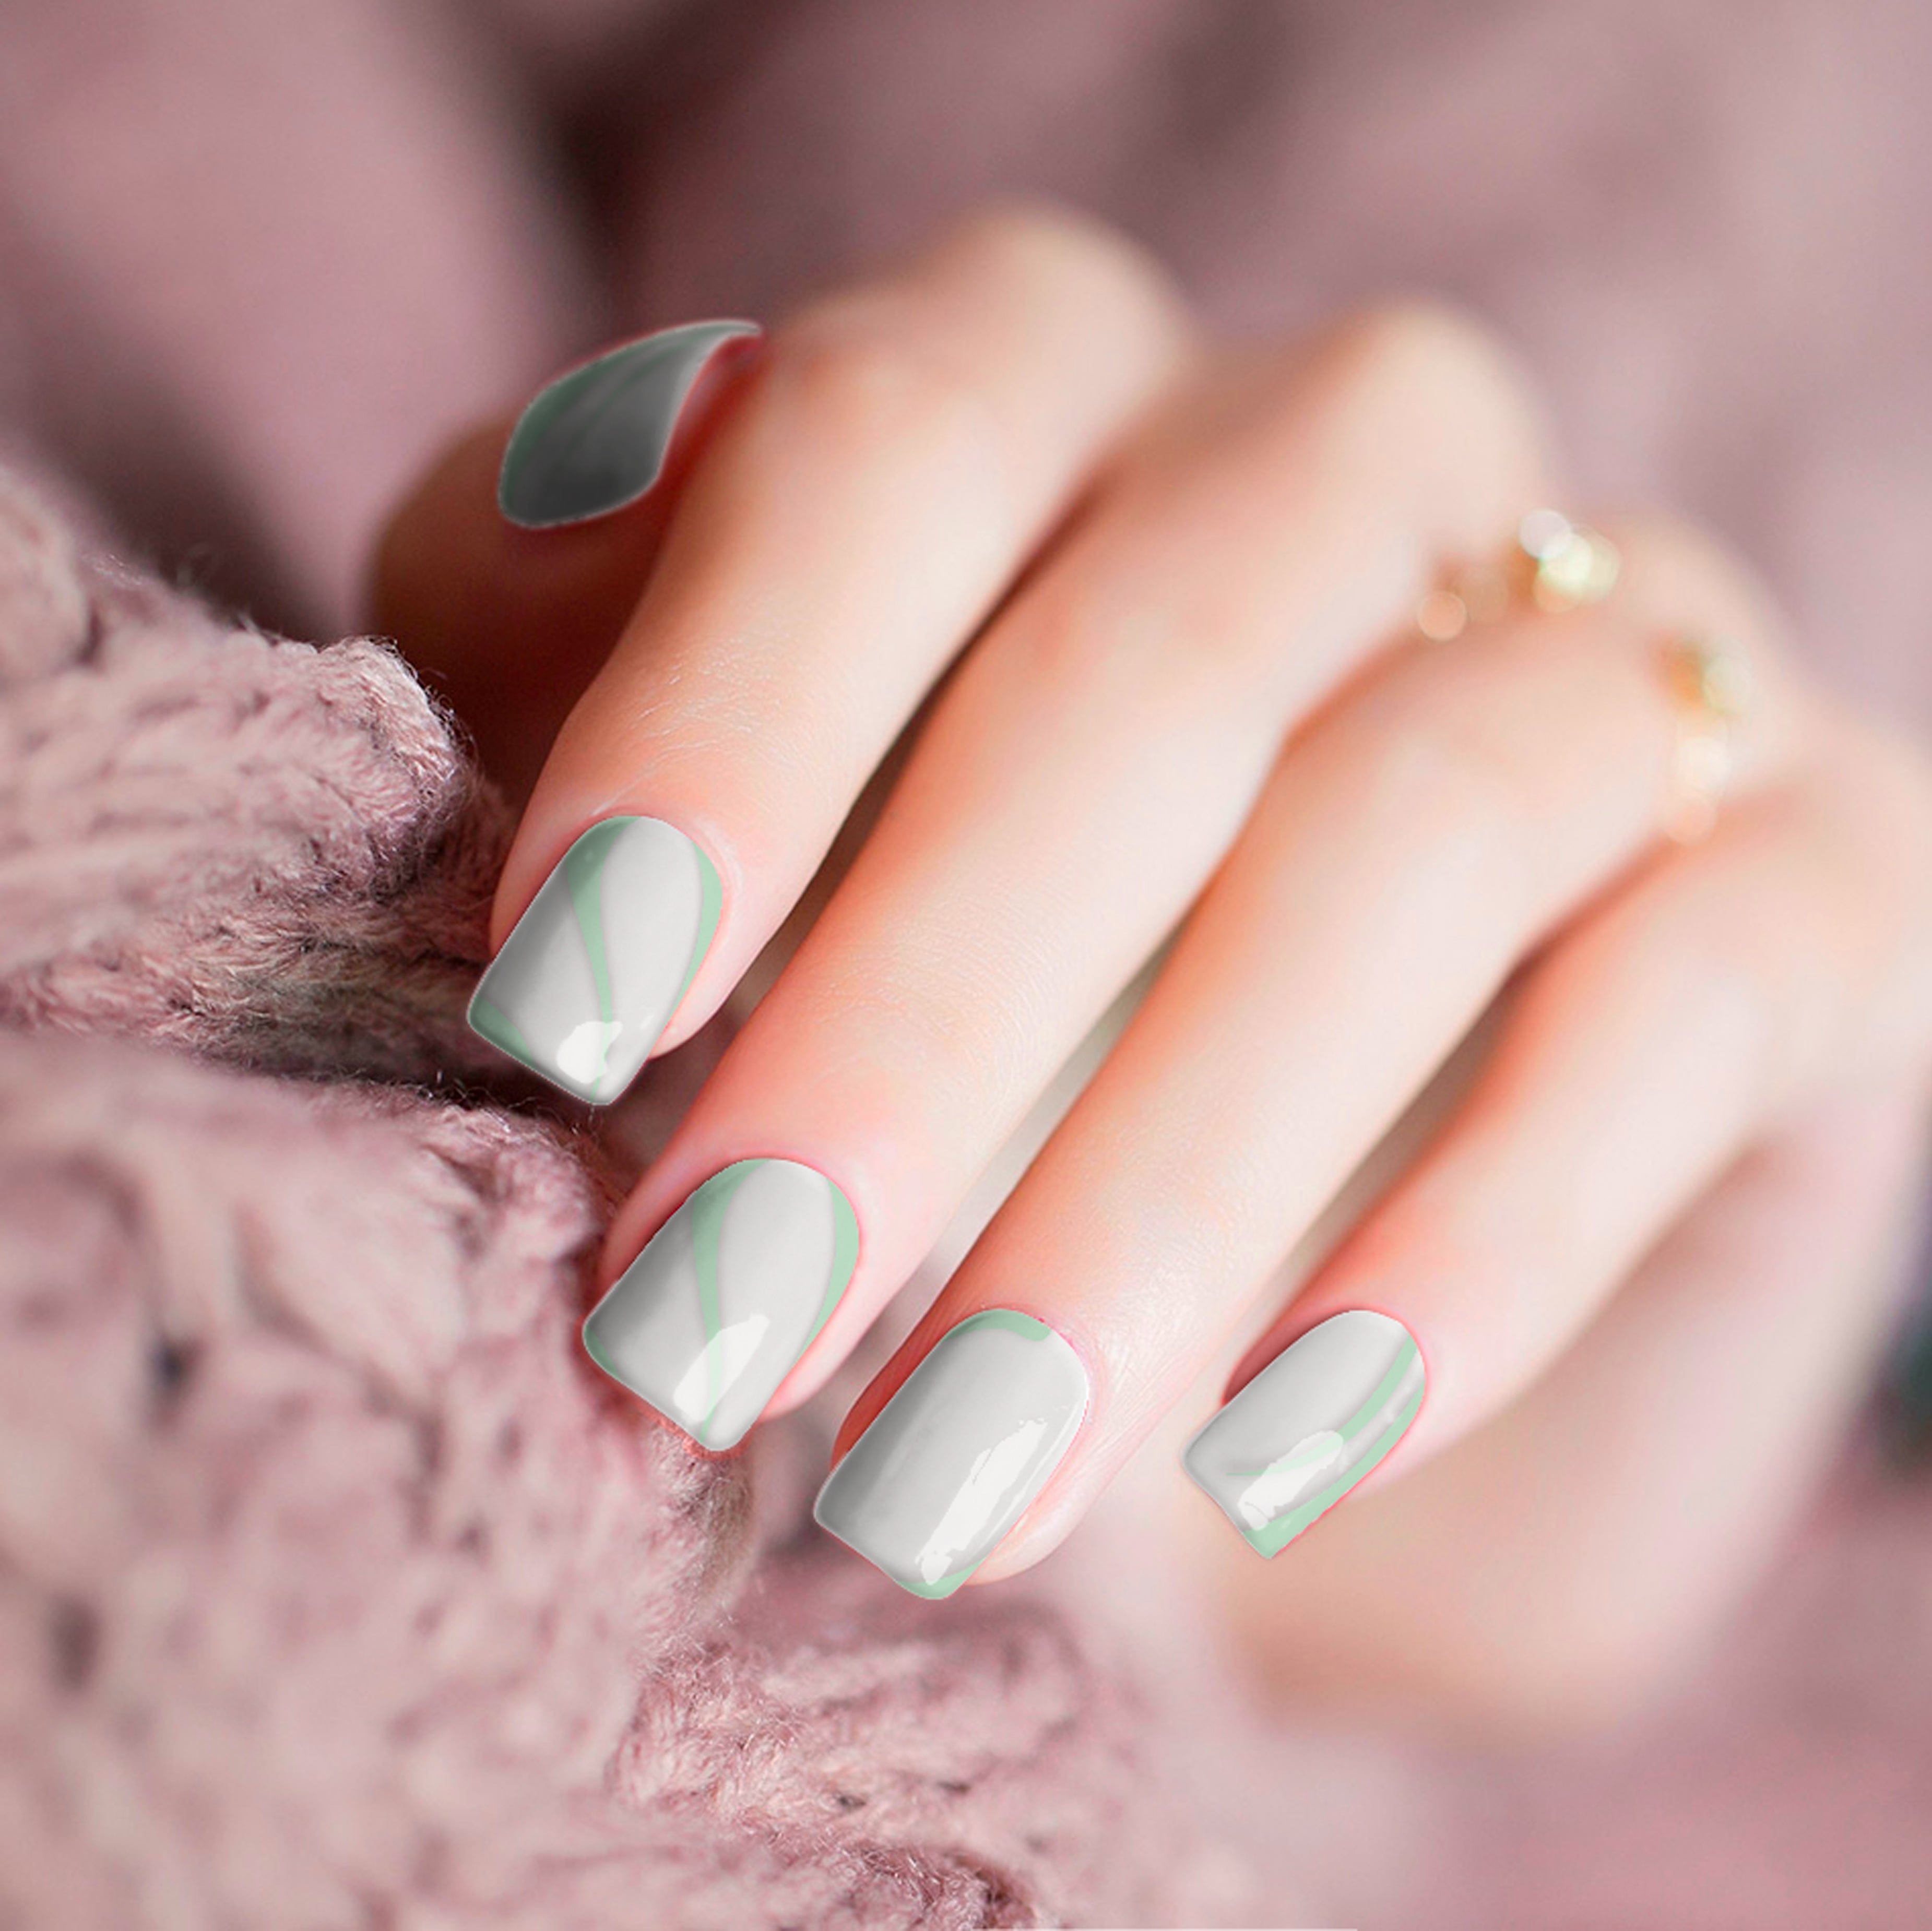 NEW: Making Me Swoon (Marvellous Mint)